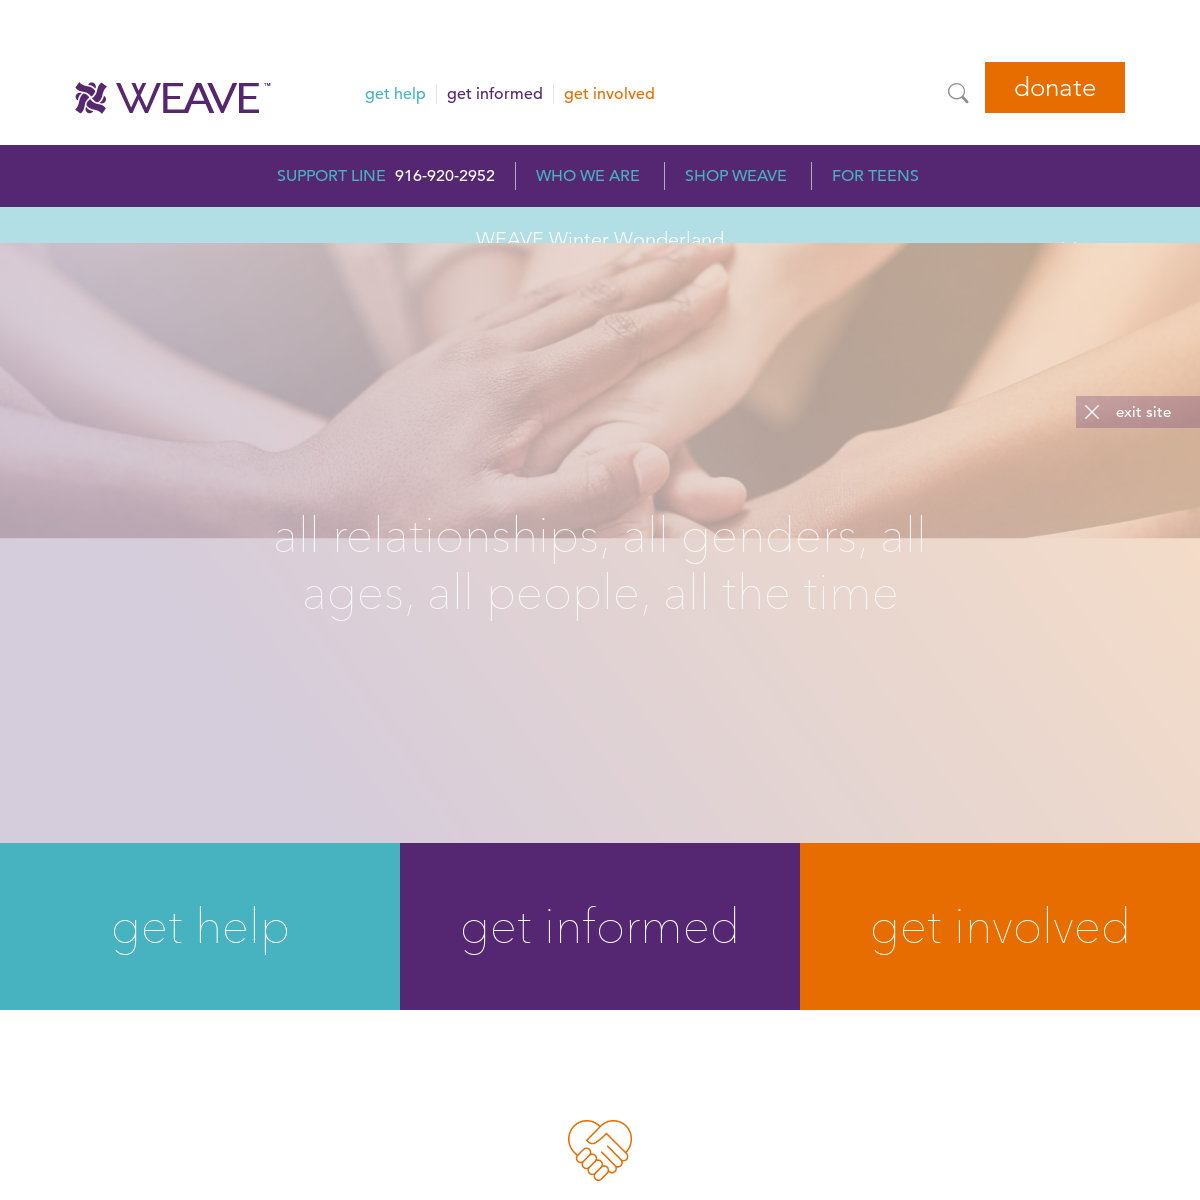 A complete backup of weaveinc.org